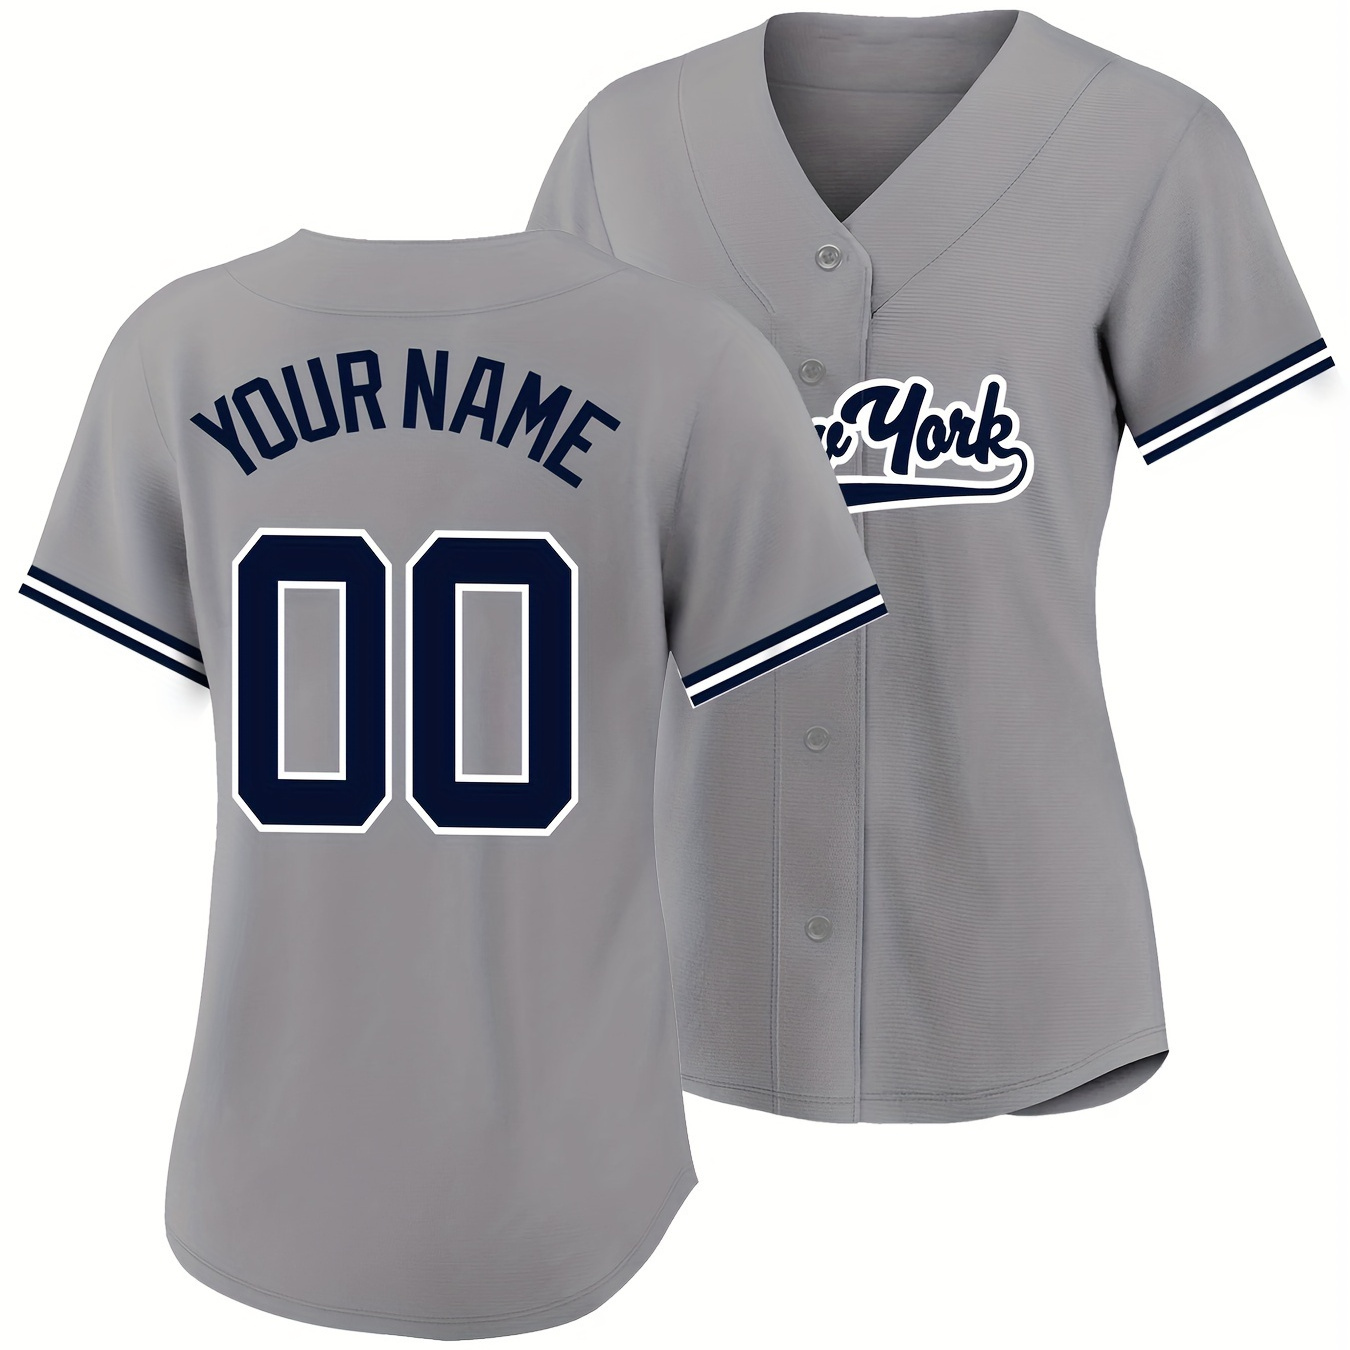 

Customizable Women's Baseball Jersey - Embroidered Name And Number - Soft Fabric, Athletic V-neck Style, Short Sleeve, Round Neck